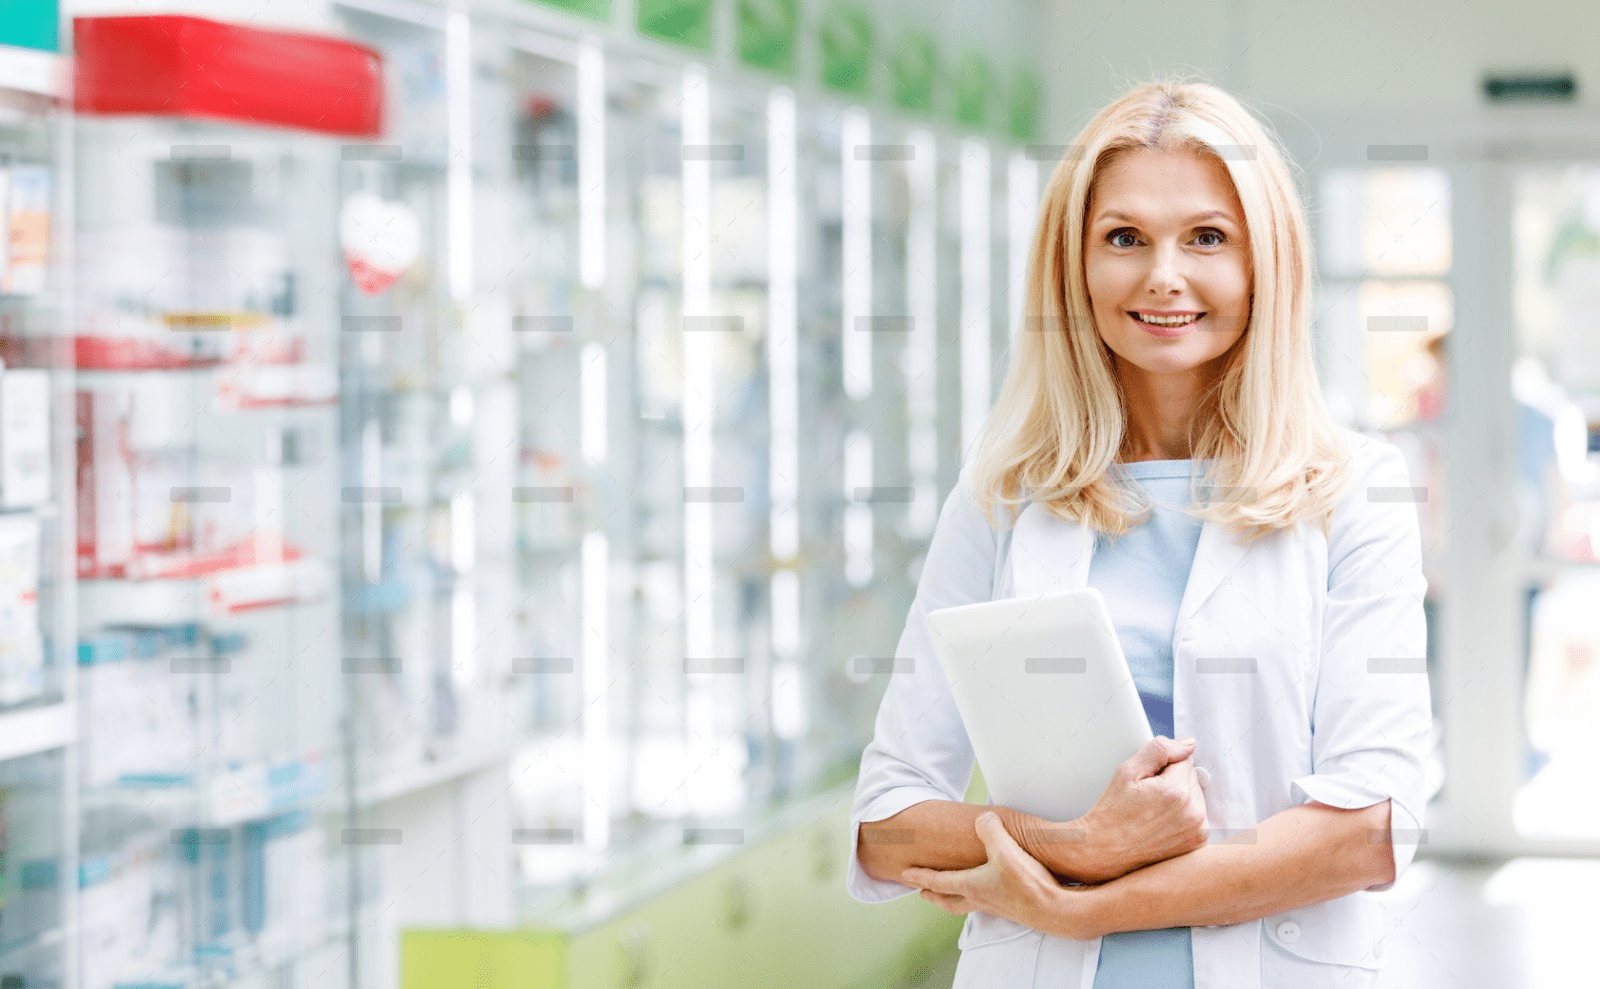 demo-attachment-1175-cheerful-pharmacist-holding-digital-tablet-and-smi-98L5GF6-1